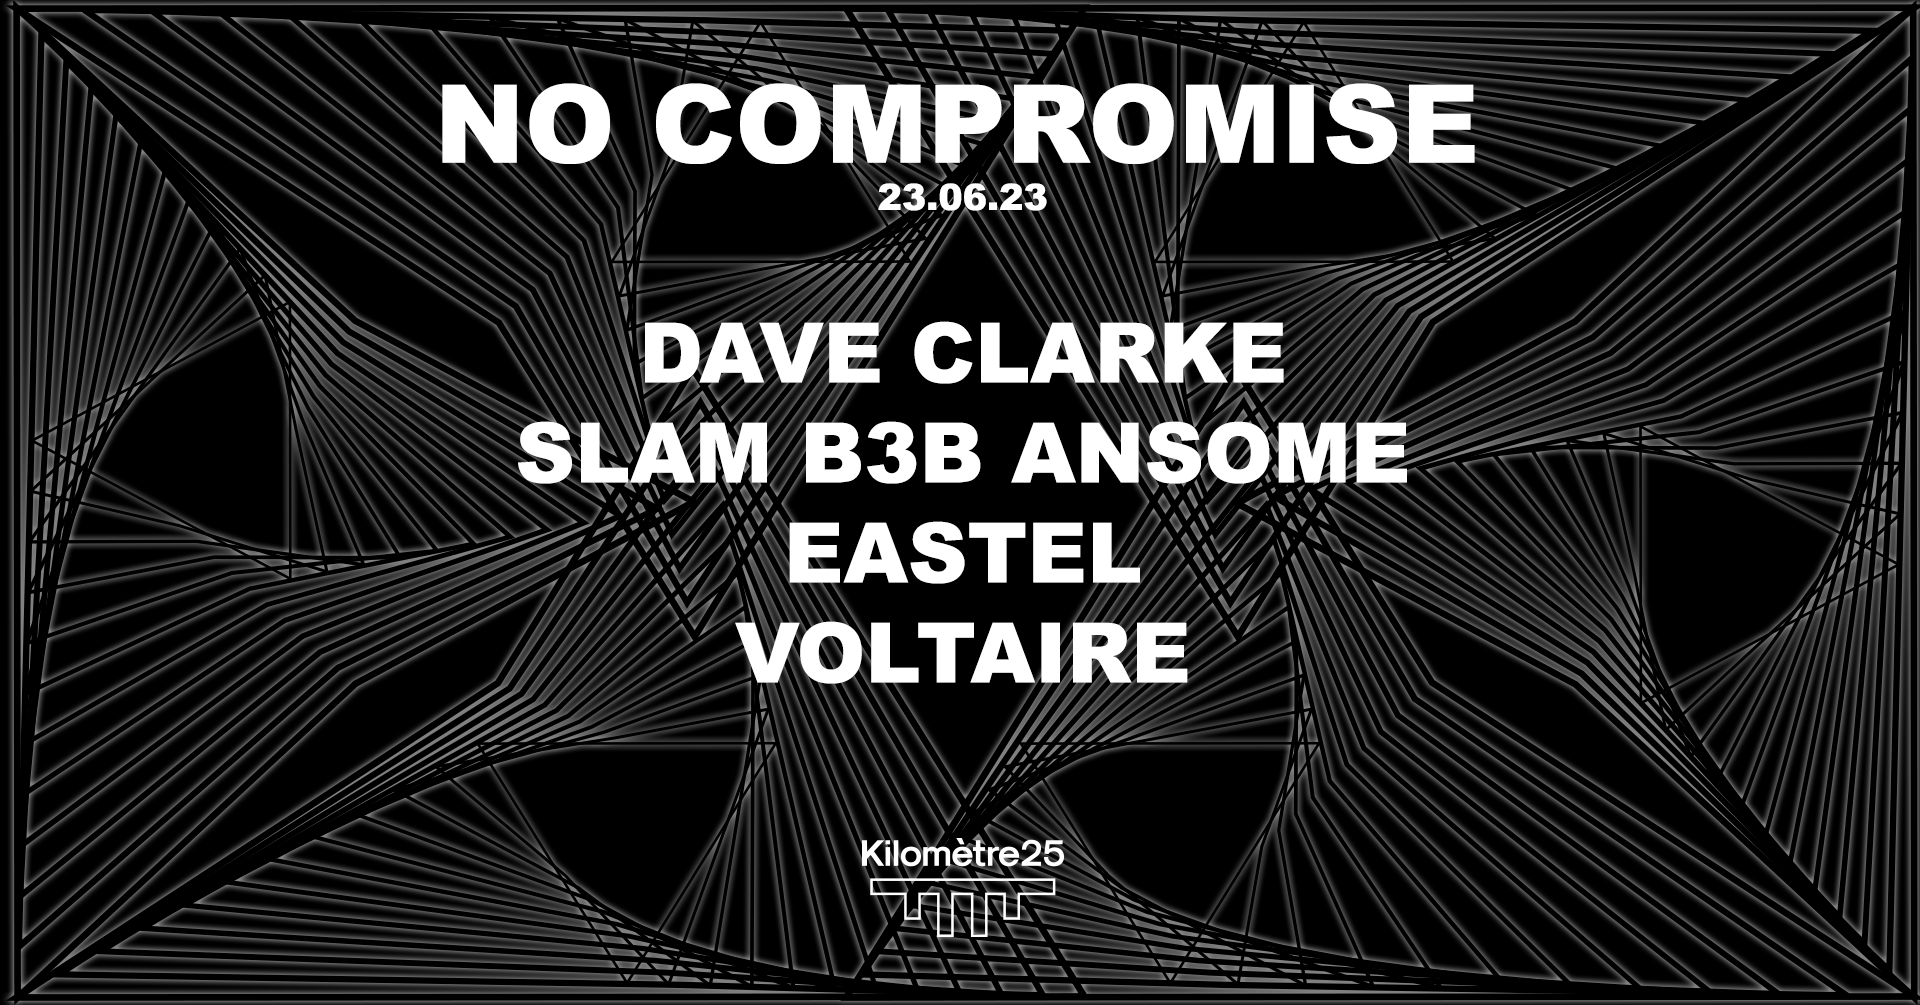 NO COMPROMISES: Dave Clarke, Slam B3B Ansome AND MORE - Página frontal